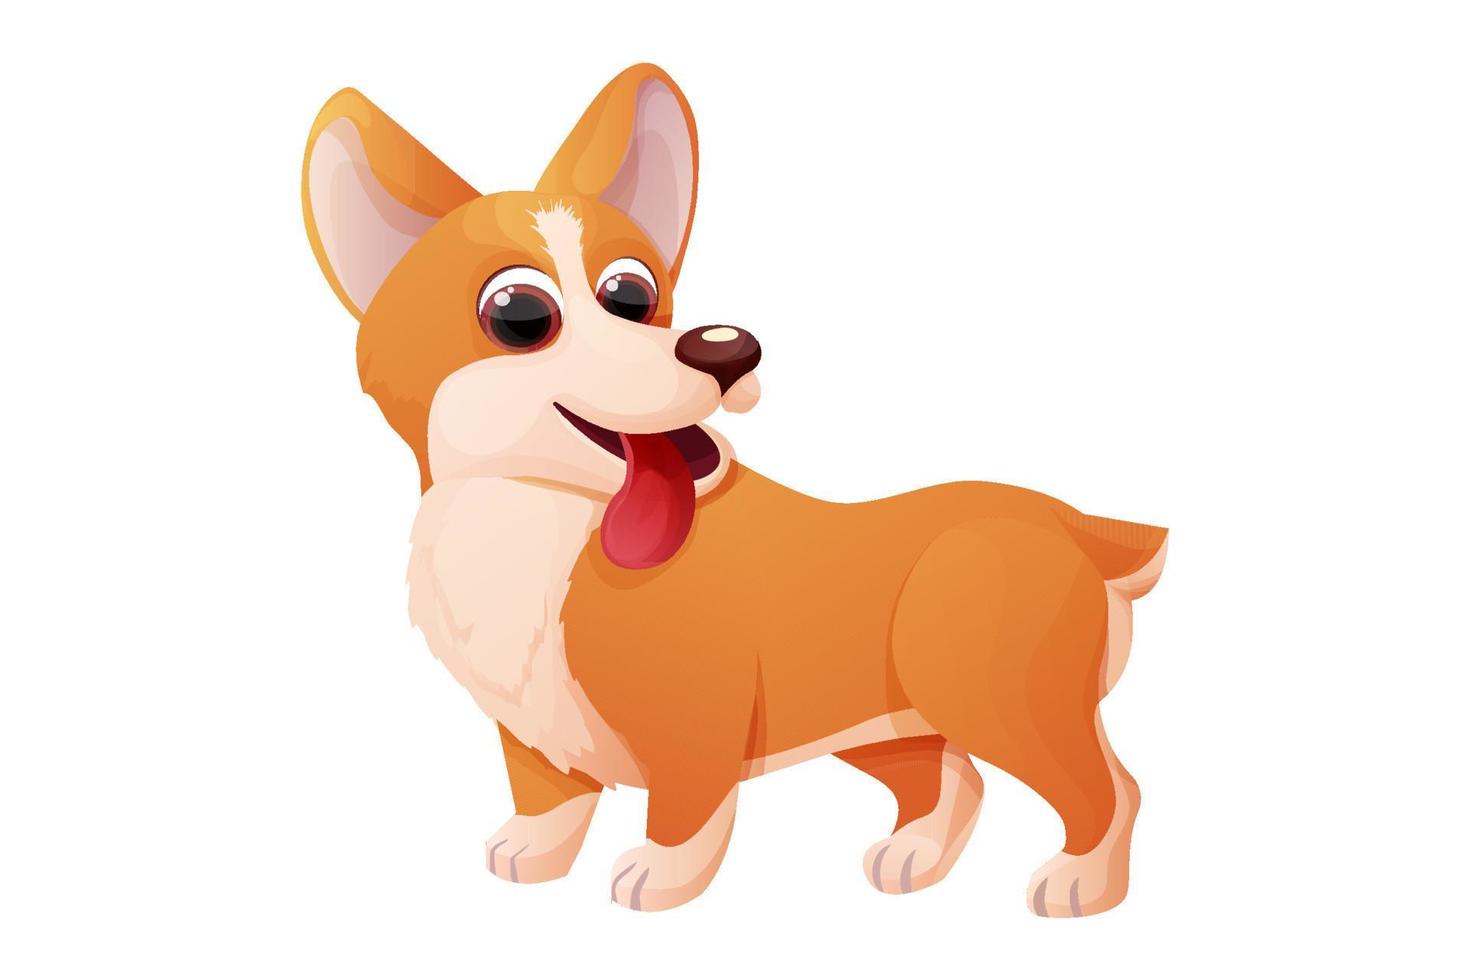 Cute corgi dog standing, adorable pet in cartoon style isolated on white background. vector